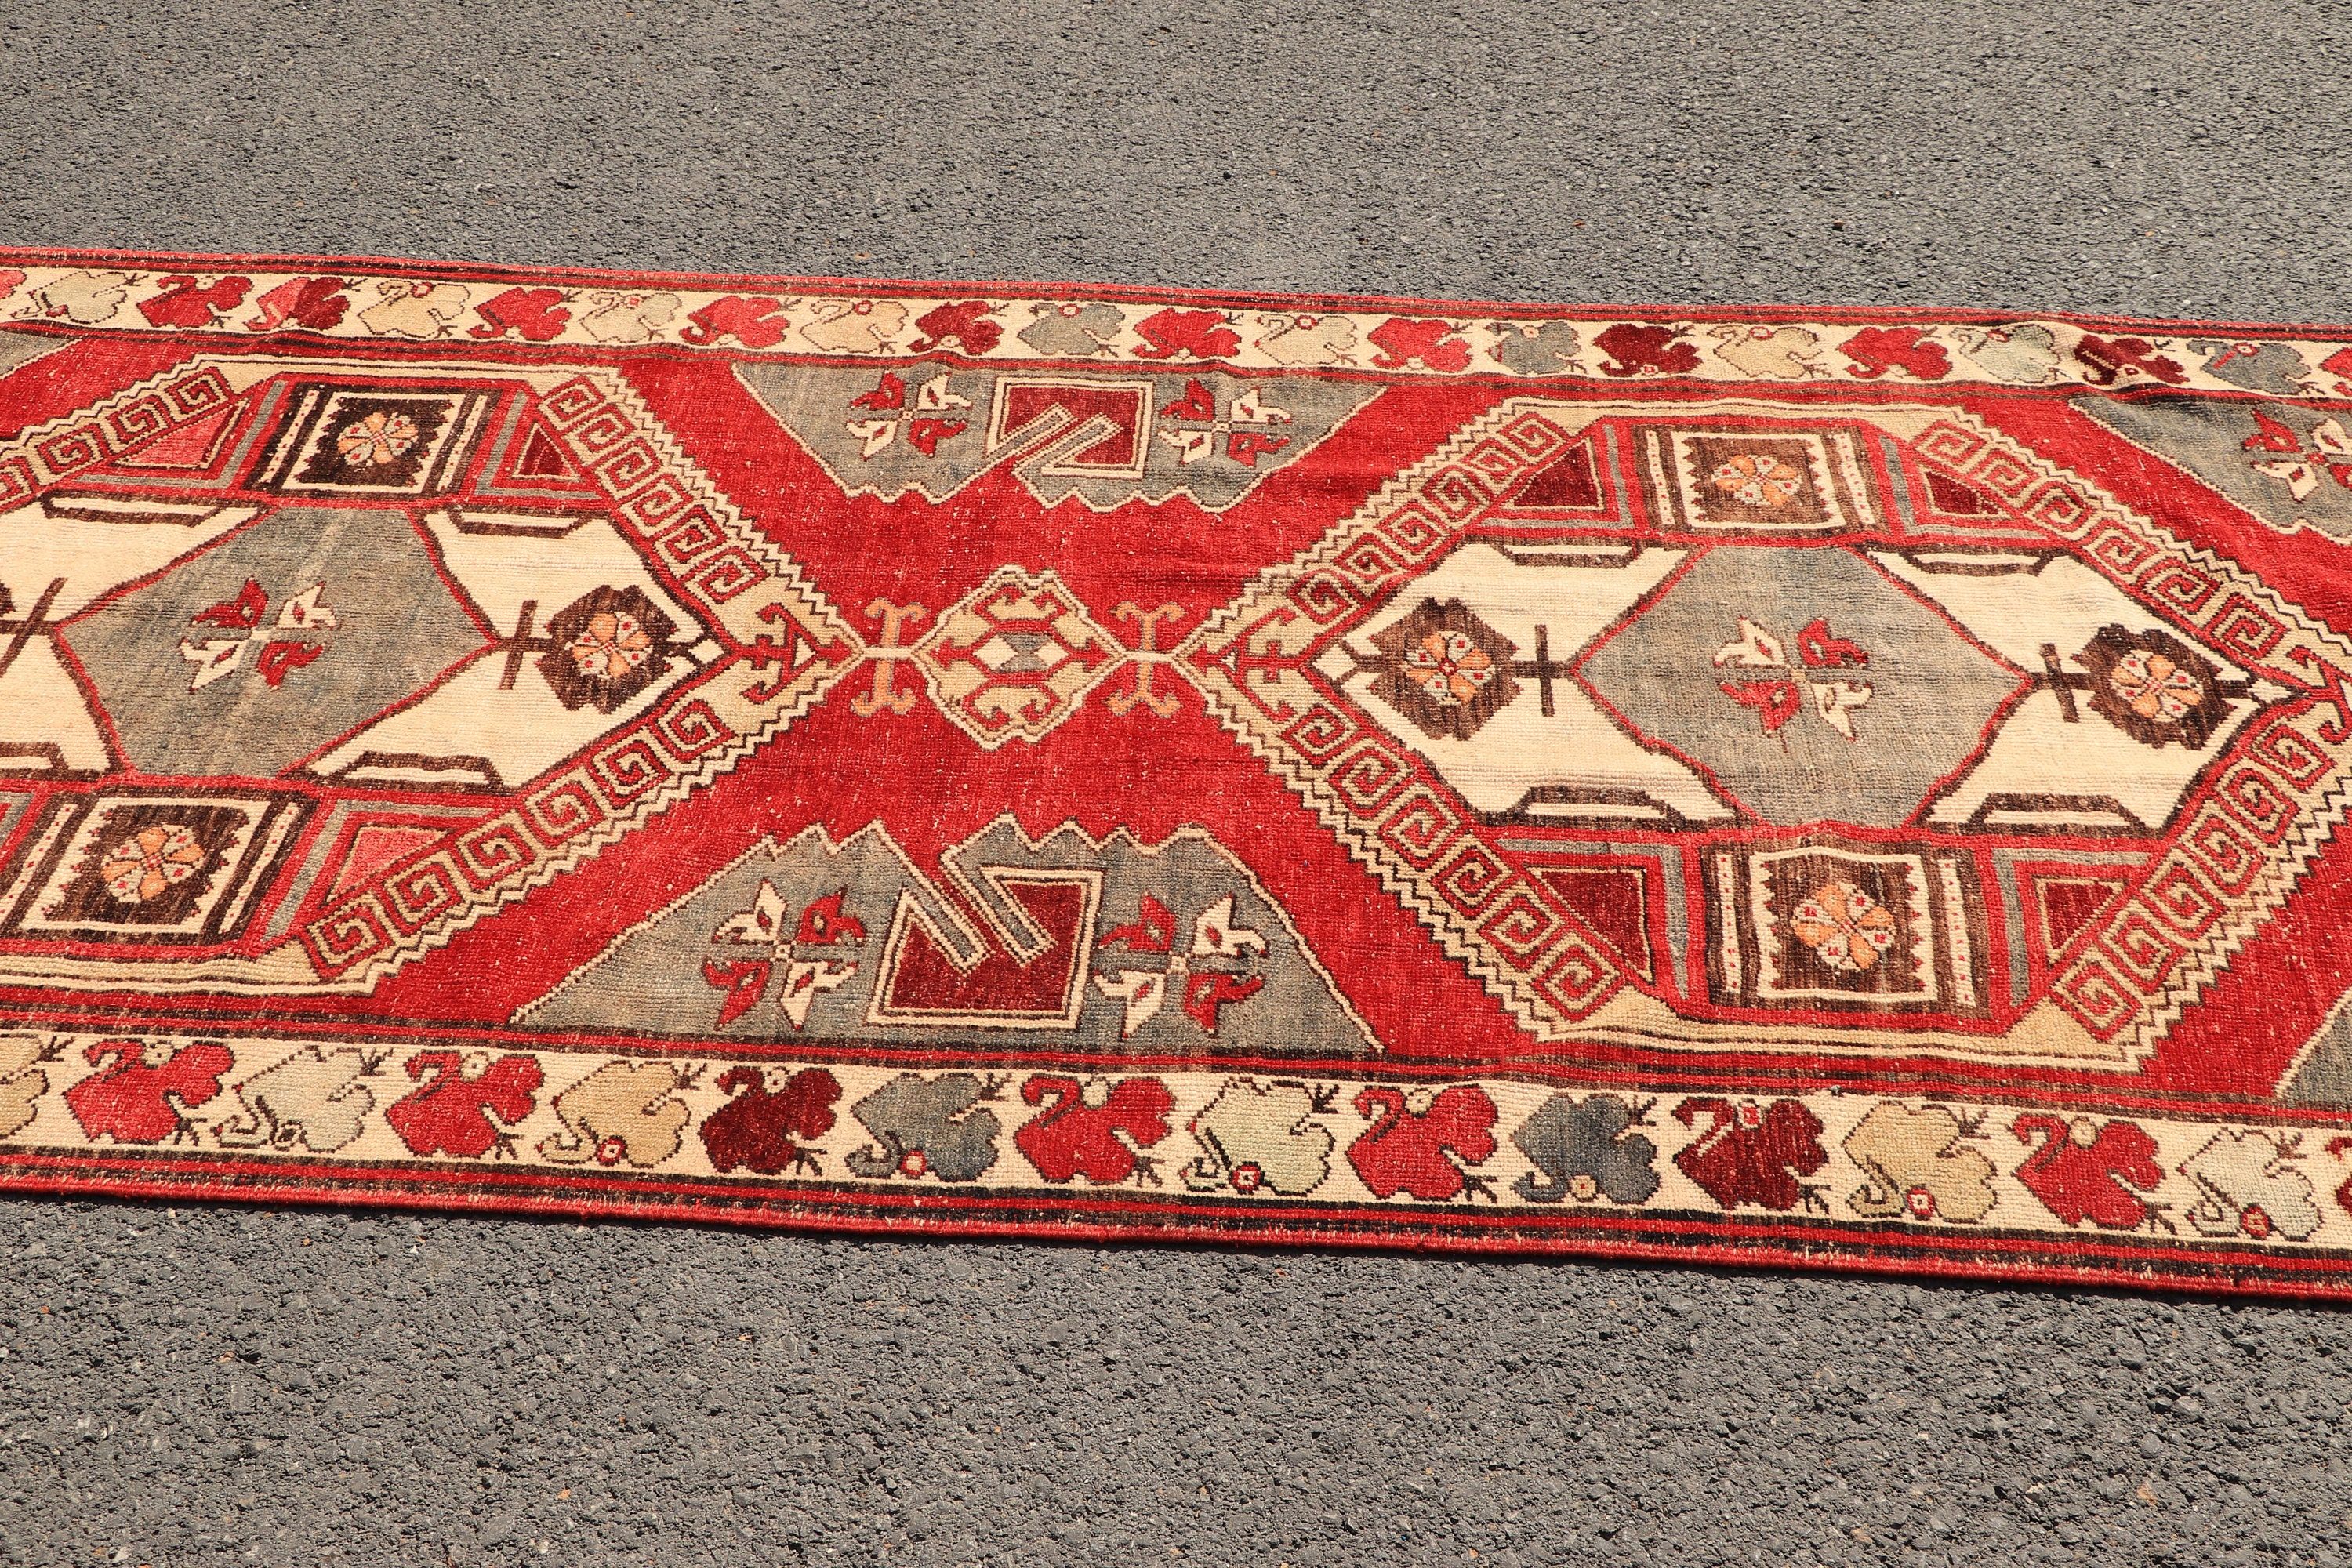 Bedroom Rugs, 4.3x11 ft Runner Rugs, Stair Rug, Vintage Rug, Turkish Rug, Kitchen Rug, Home Decor Rug, Red Moroccan Rugs, Rugs for Kitchen